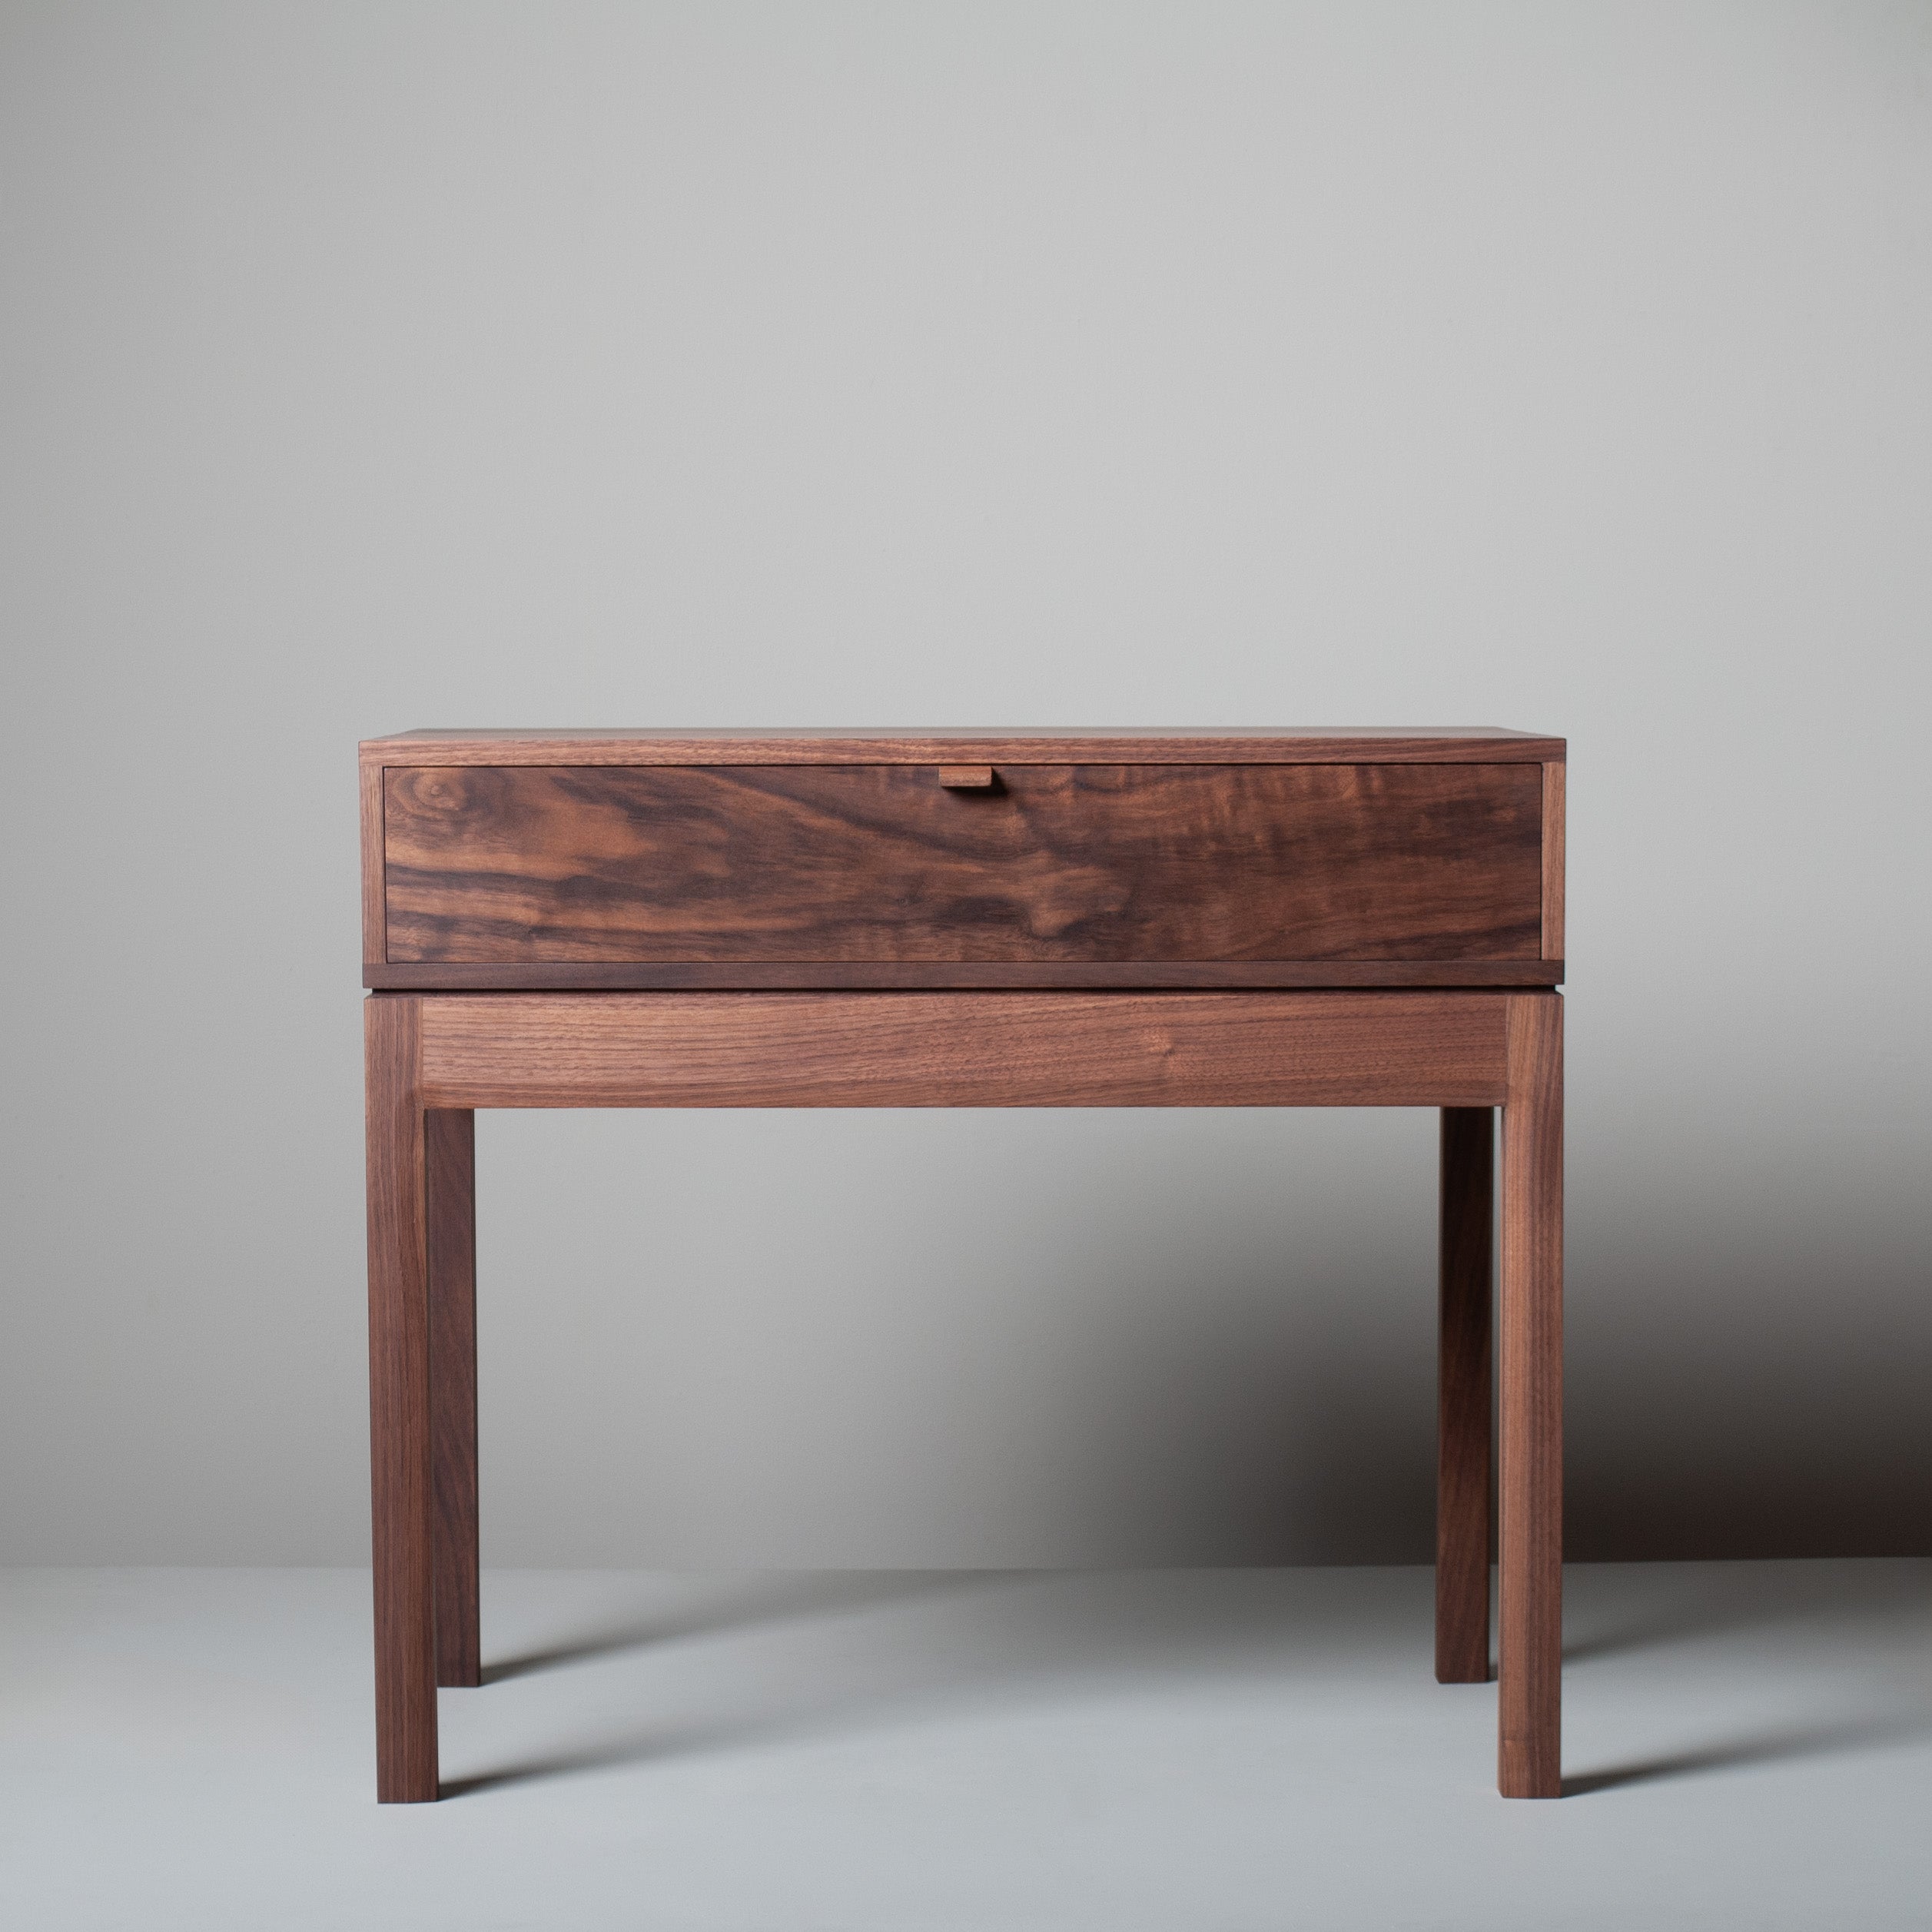 An American black walnut and English oak hand-crafted drawer table/nightstand/end table in a modernist design. These are constructed from the finest American black walnut with the inner dovetailed jointed traditional drawer carcass in prime English